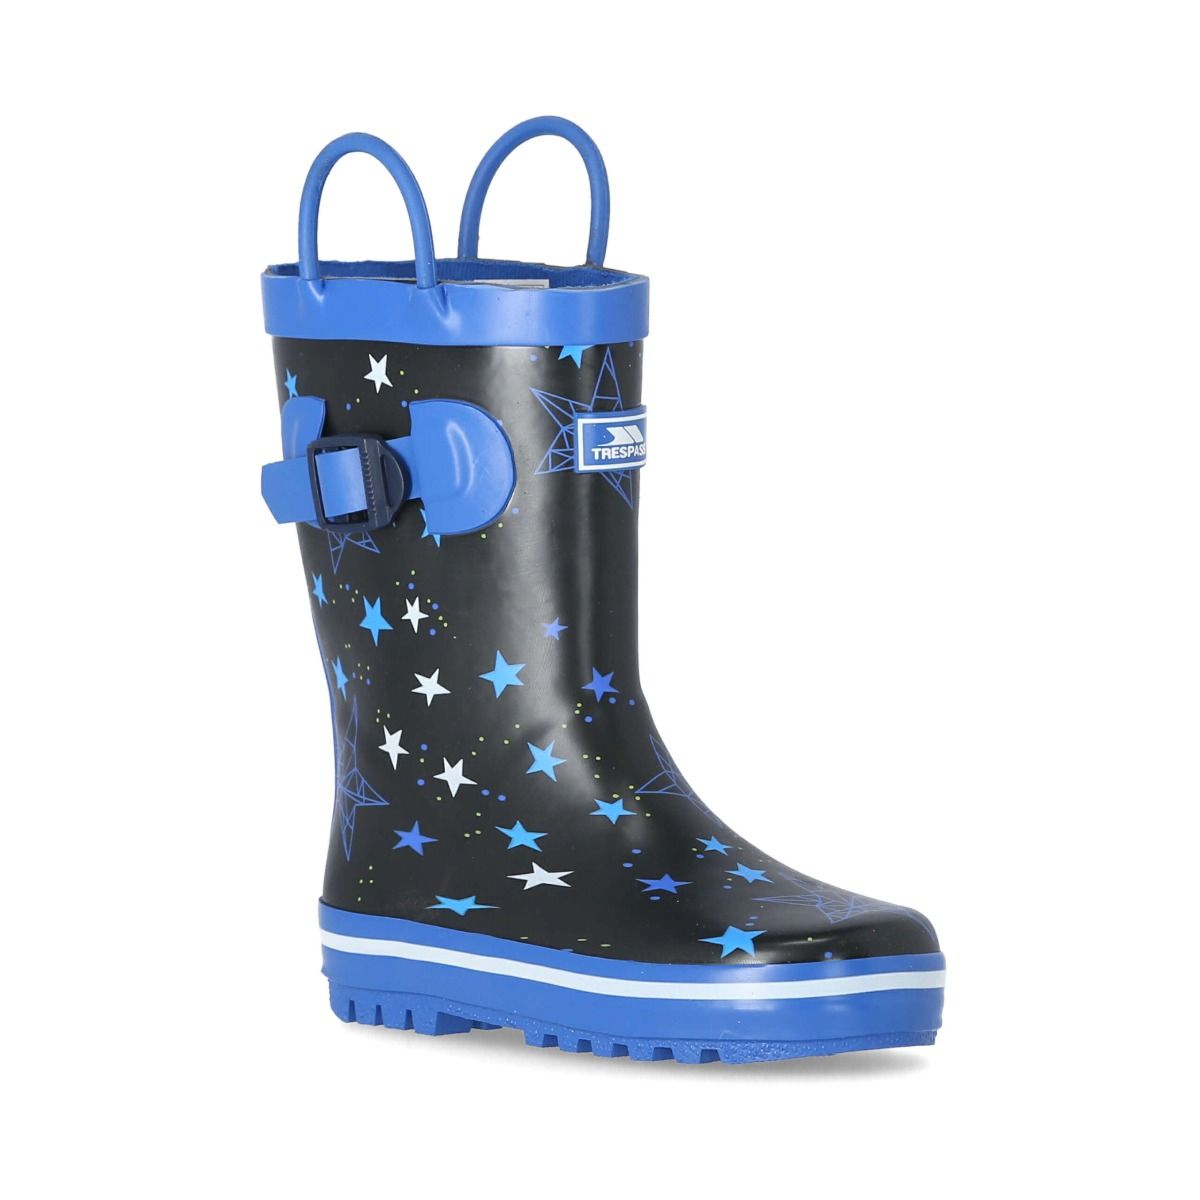 Astron Kids Printed Wellies